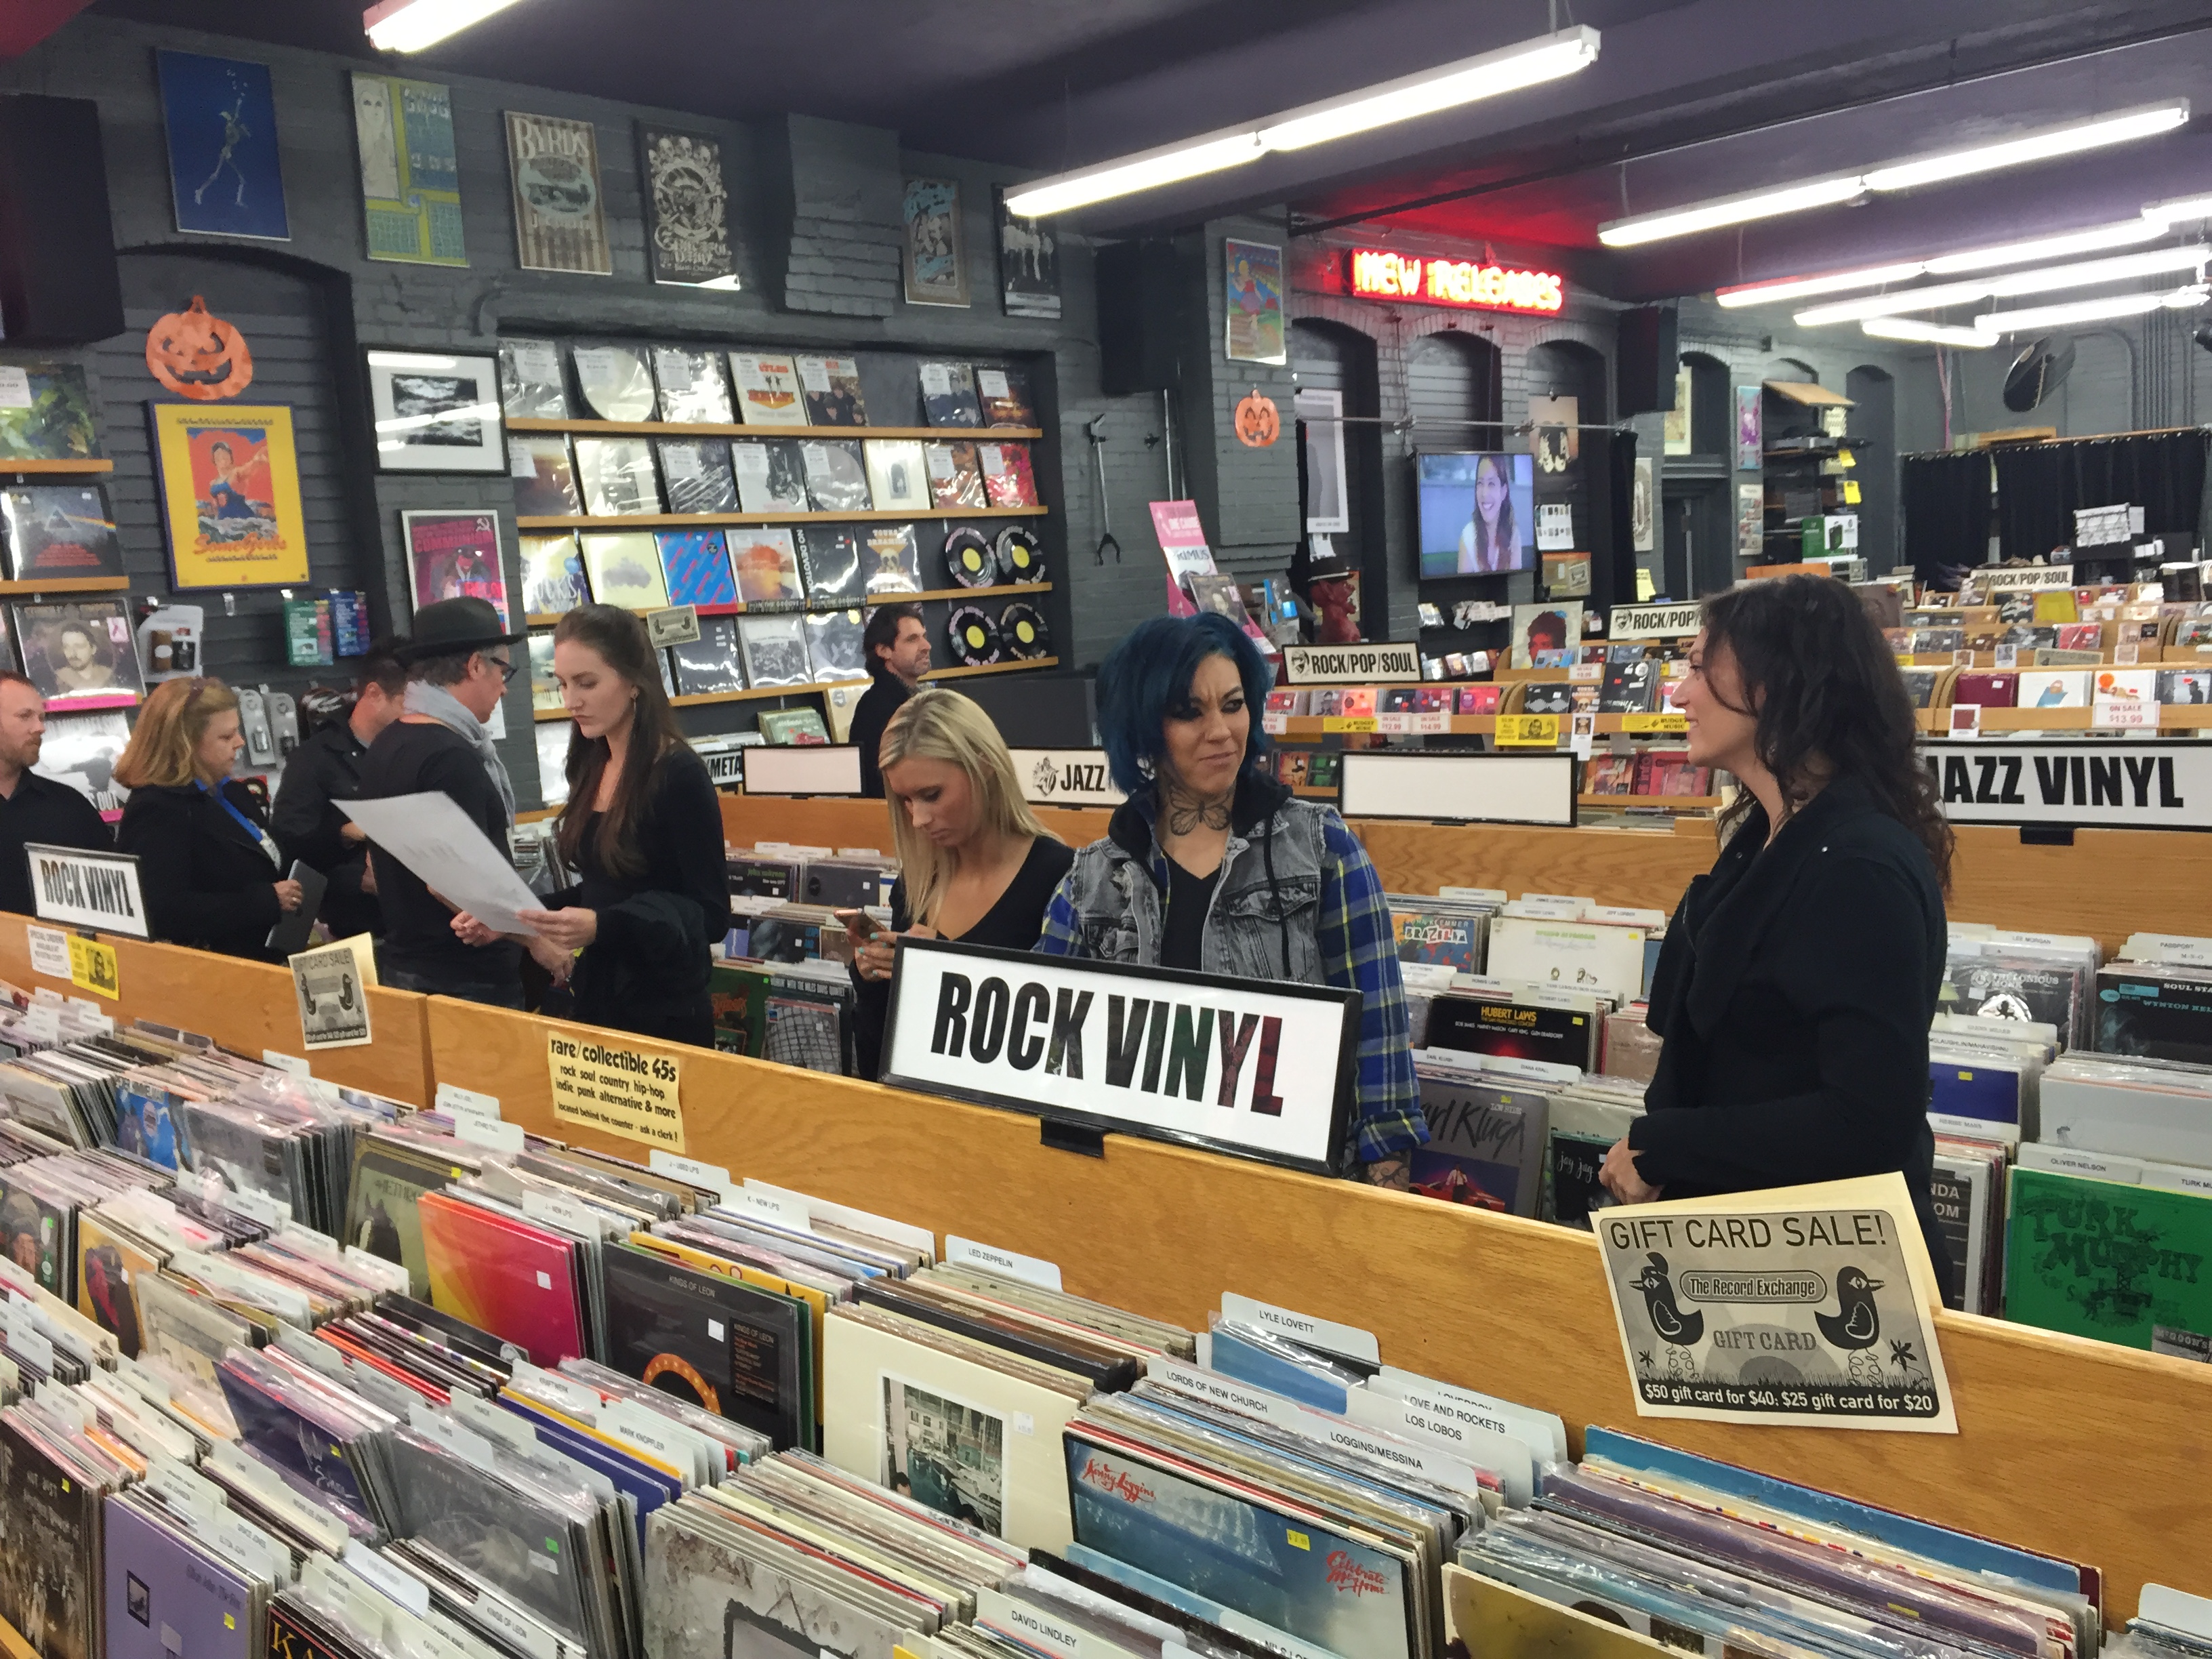 Music Shopping With Collective Soul at The Record Exchange